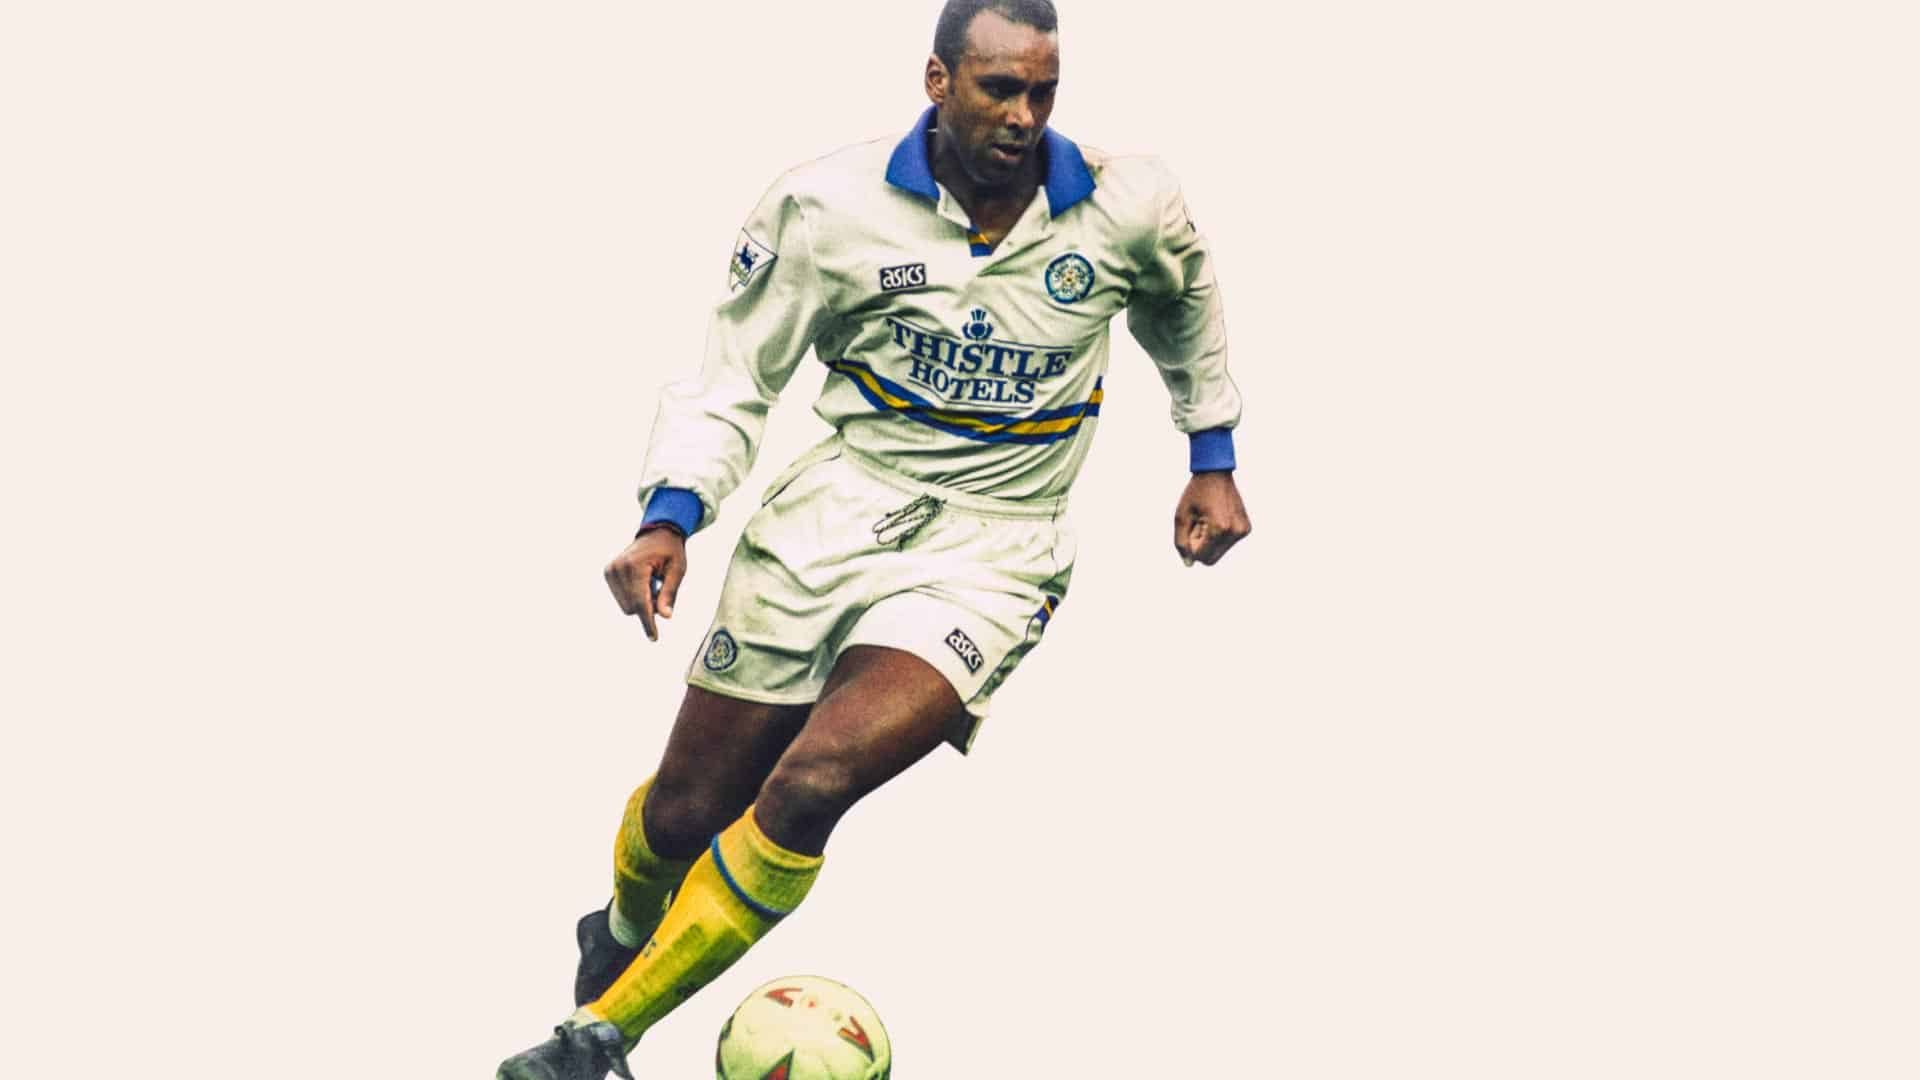 A photo of David Rocastle in Leeds United's 1993/94 Thistle Hotels-sponsored home kit